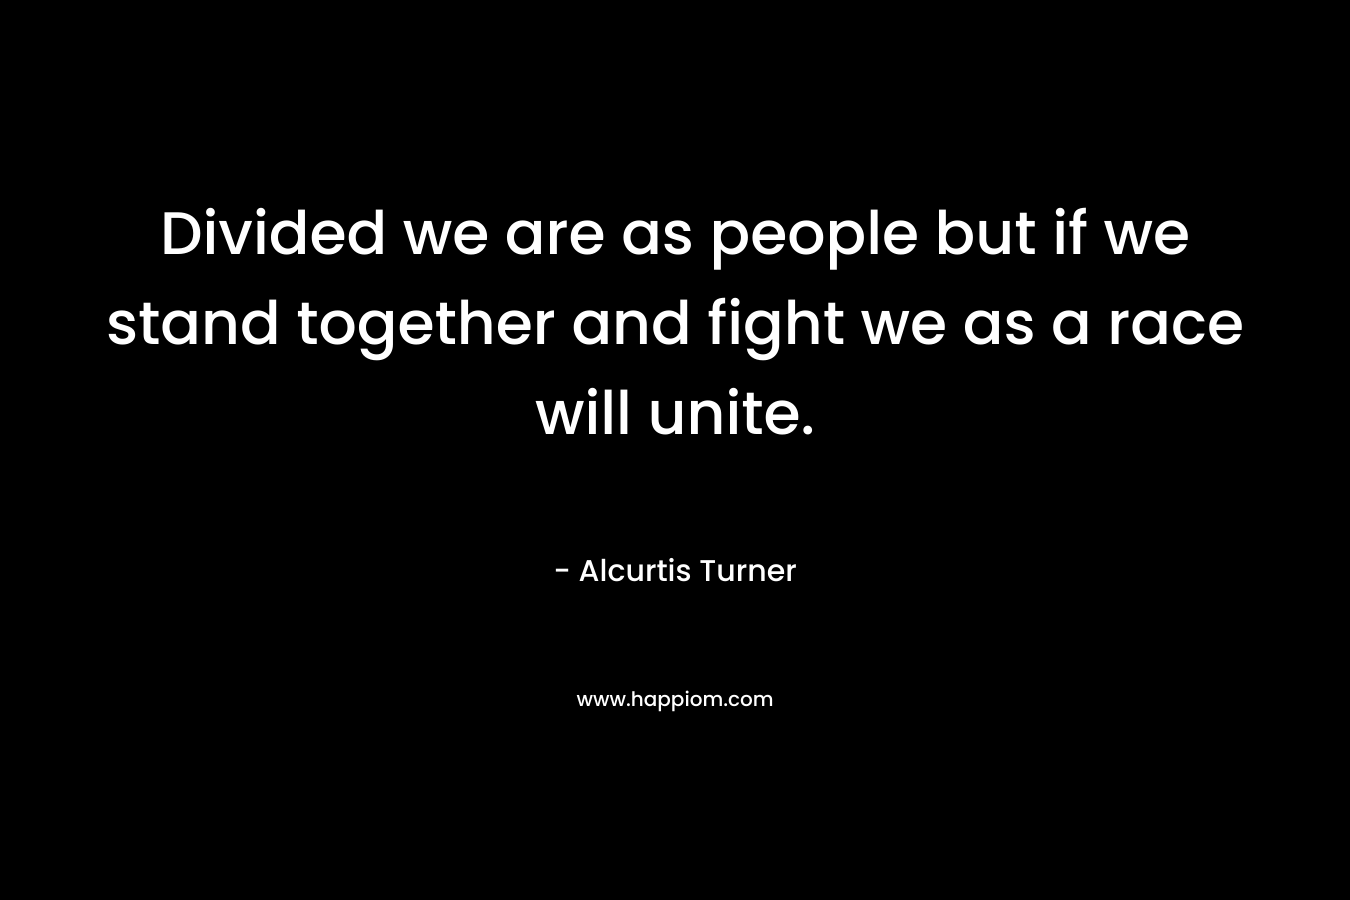 Divided we are as people but if we stand together and fight we as a race will unite. – Alcurtis Turner